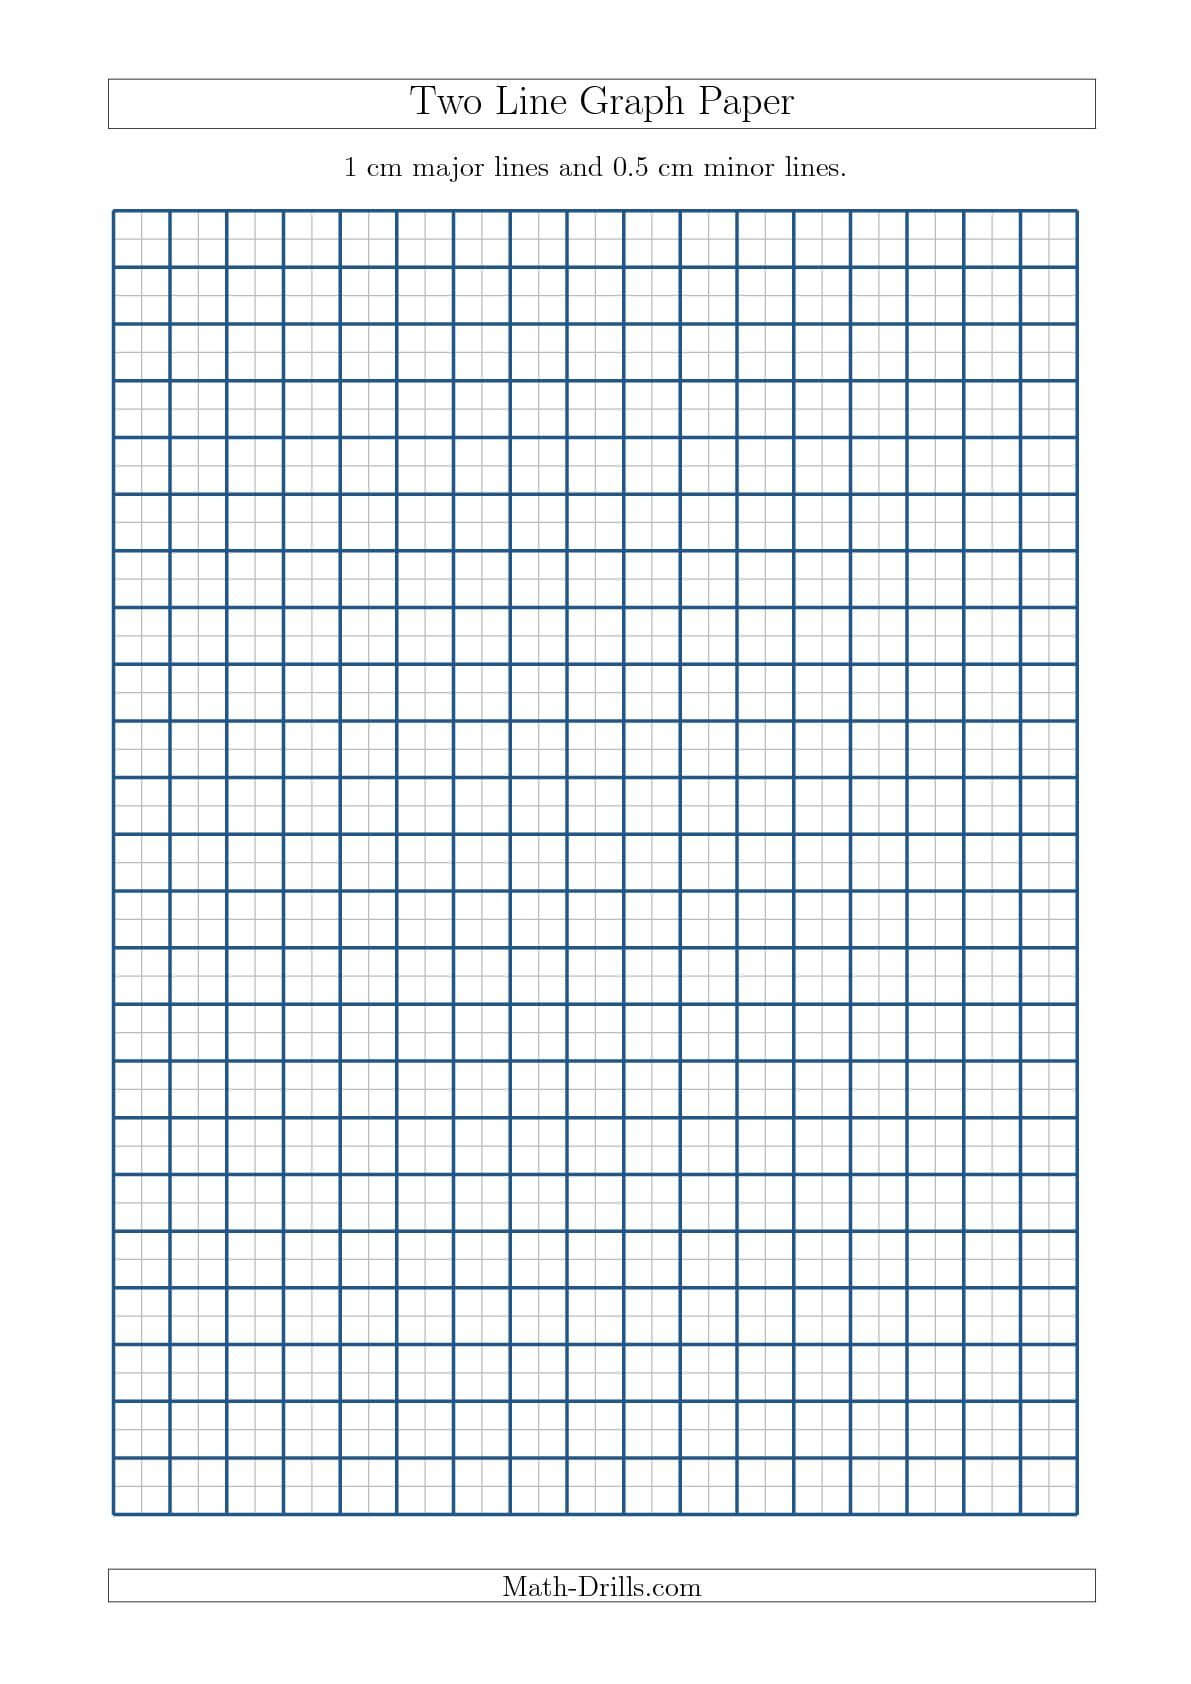 Two Line Graph Paper With 1 Cm Major Lines And 0.5 Cm Minor With Regard To 1 Cm Graph Paper Template Word